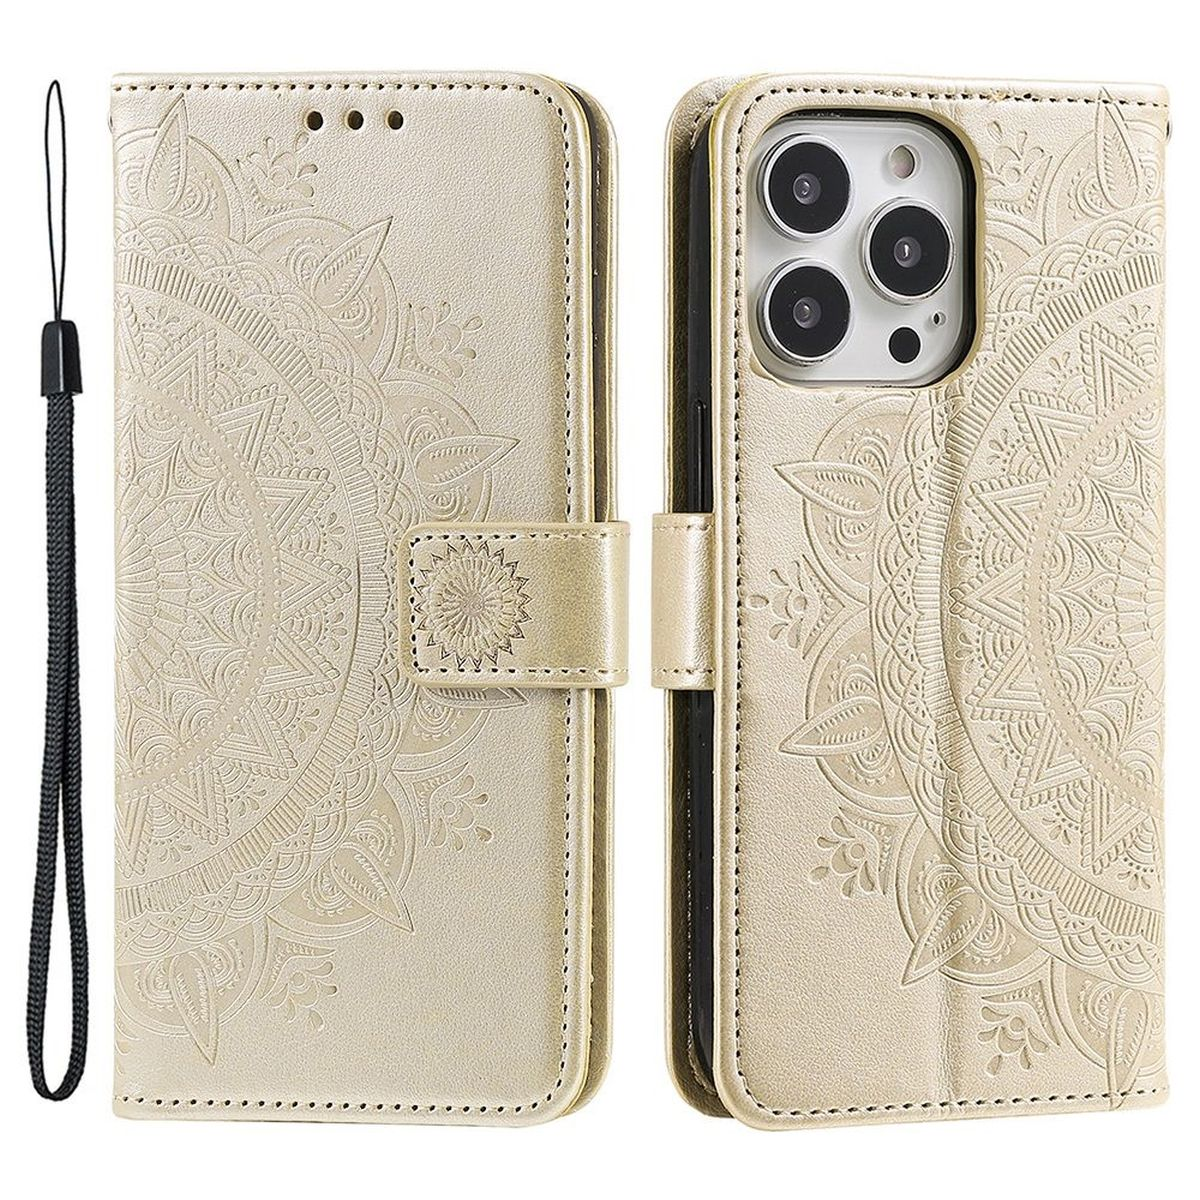 COVERKINGZ Klapphülle mit Mandala Muster, Pro Max, Bookcover, Gold 14 iPhone Apple